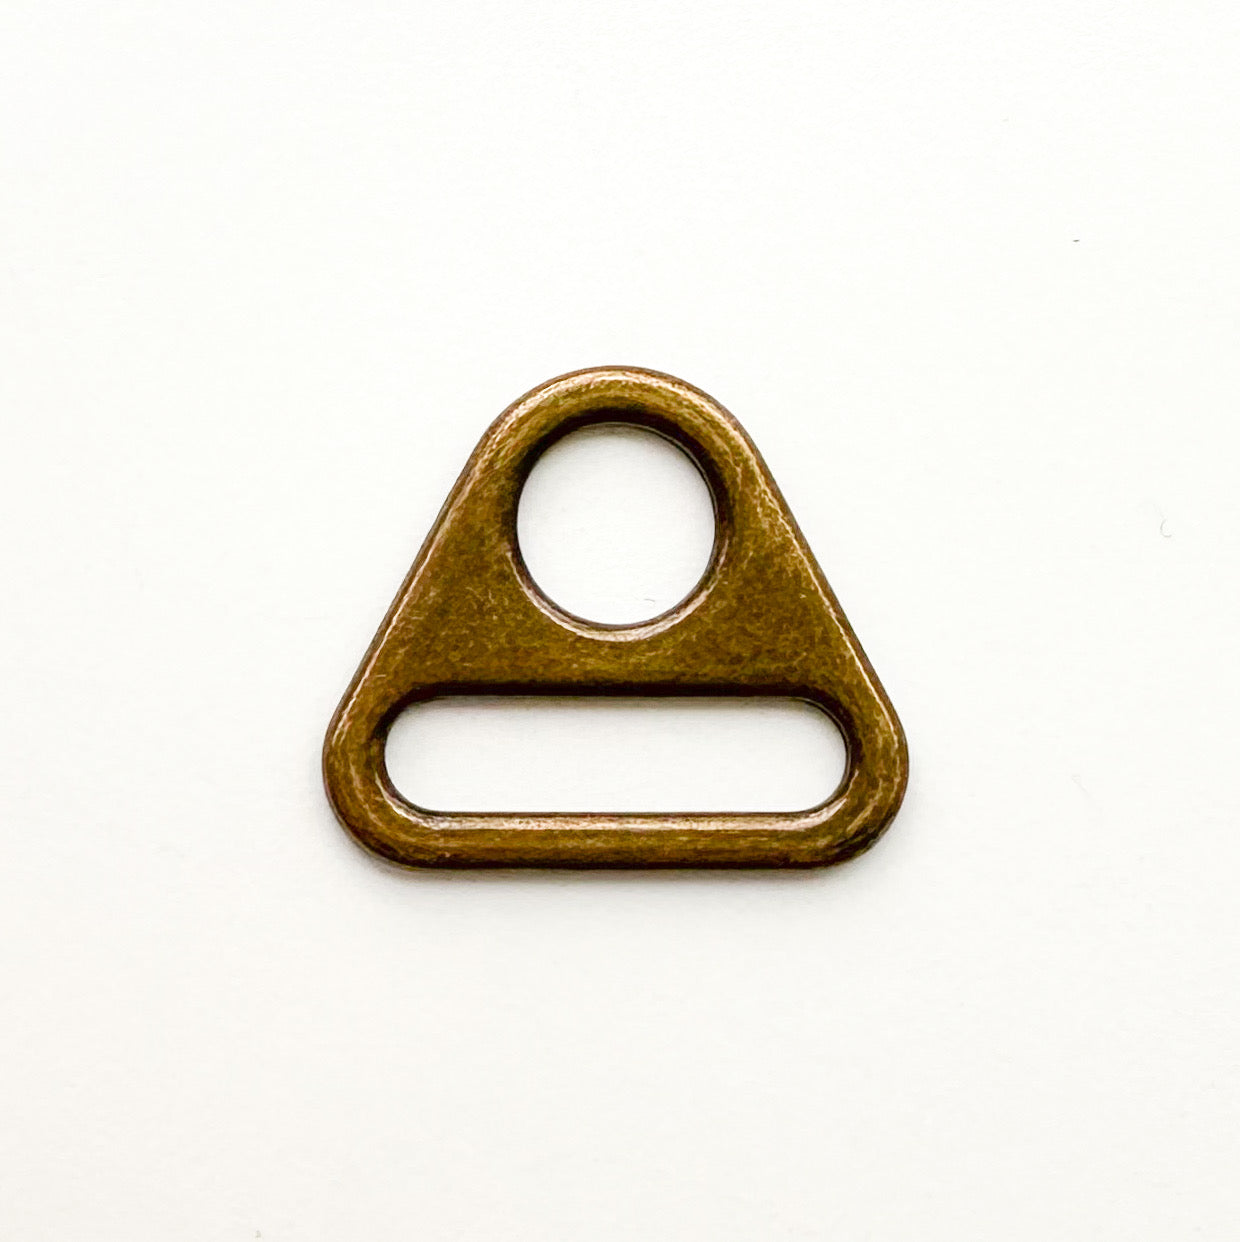 Triangle rings size: 1” (25mm)